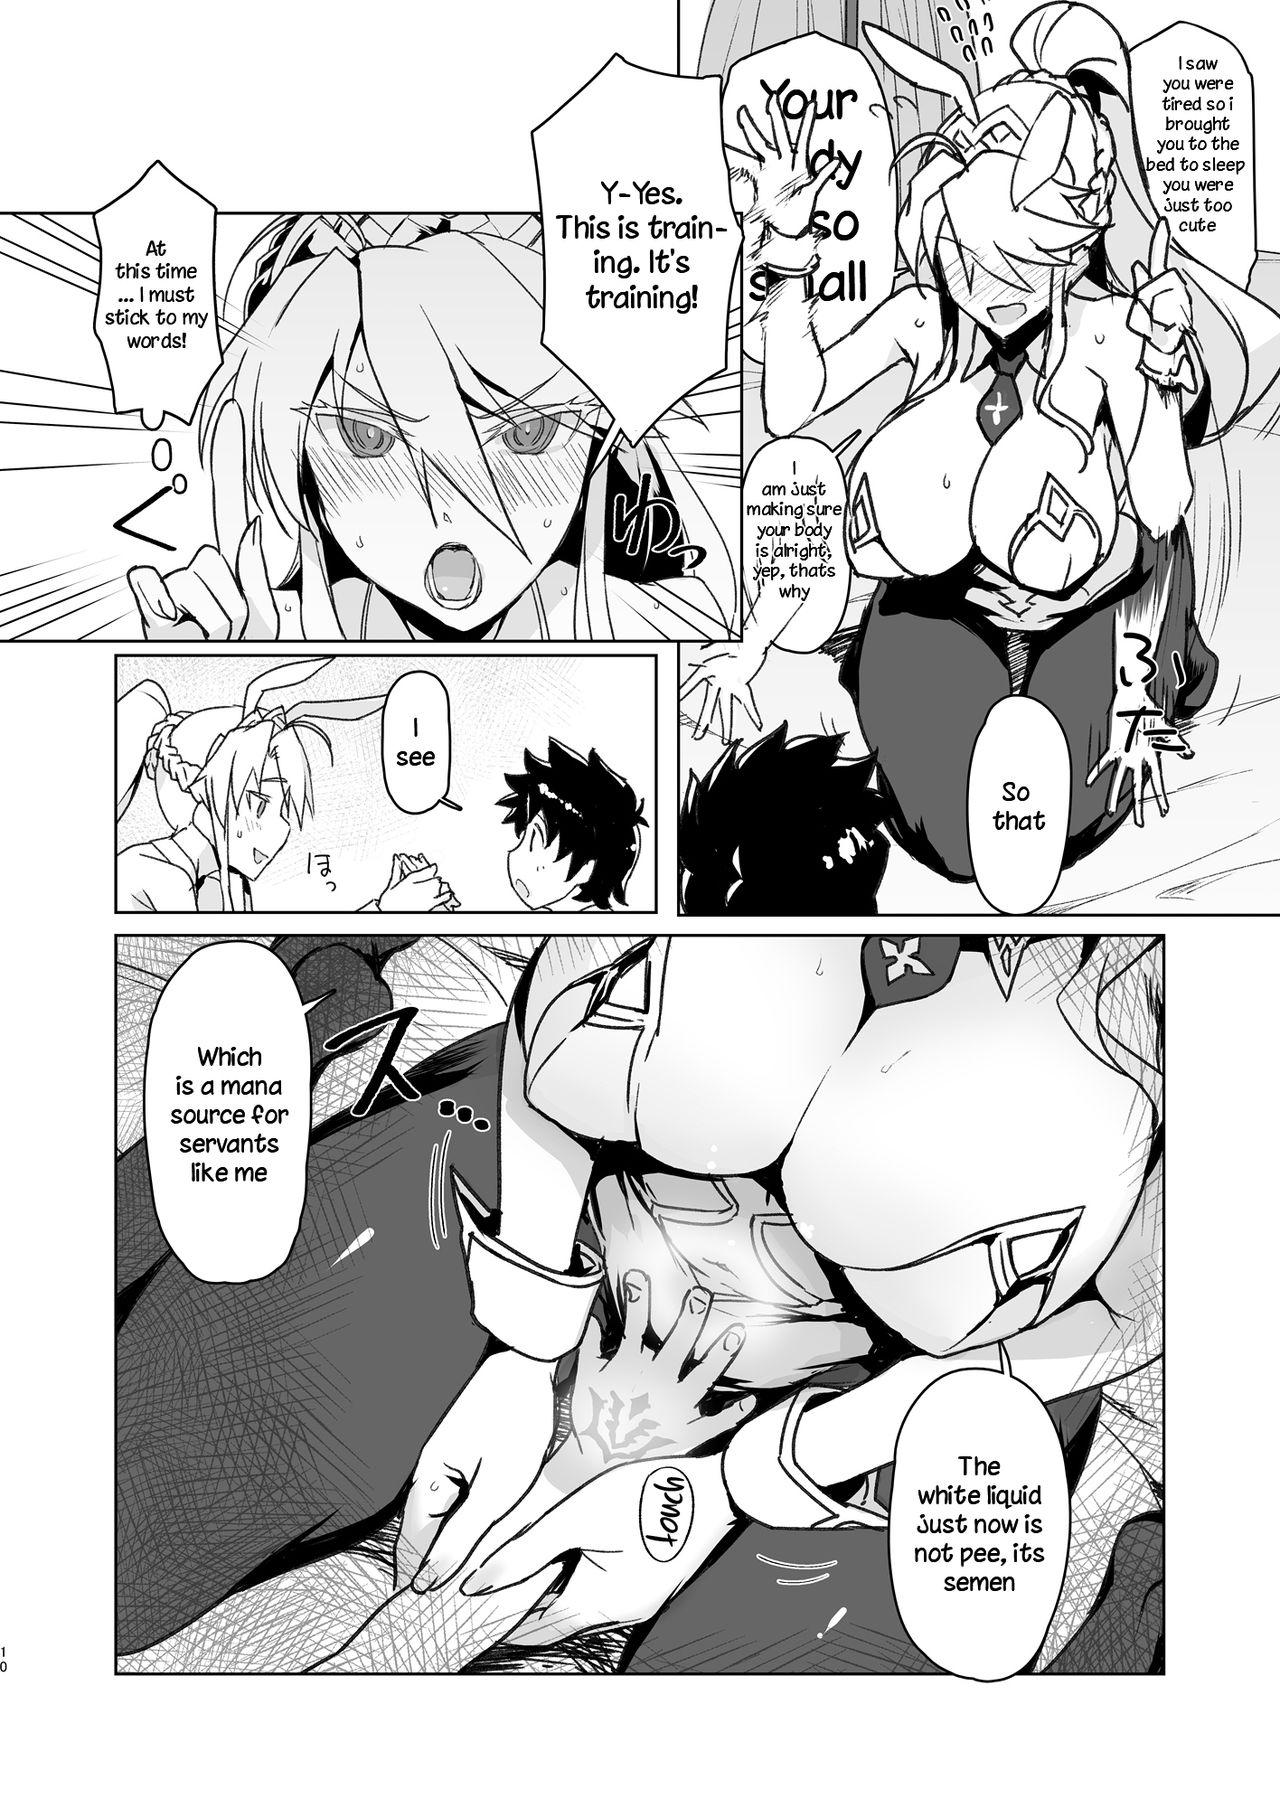 Perfect Body Melancholic Summer - Fate grand order Online - Page 9